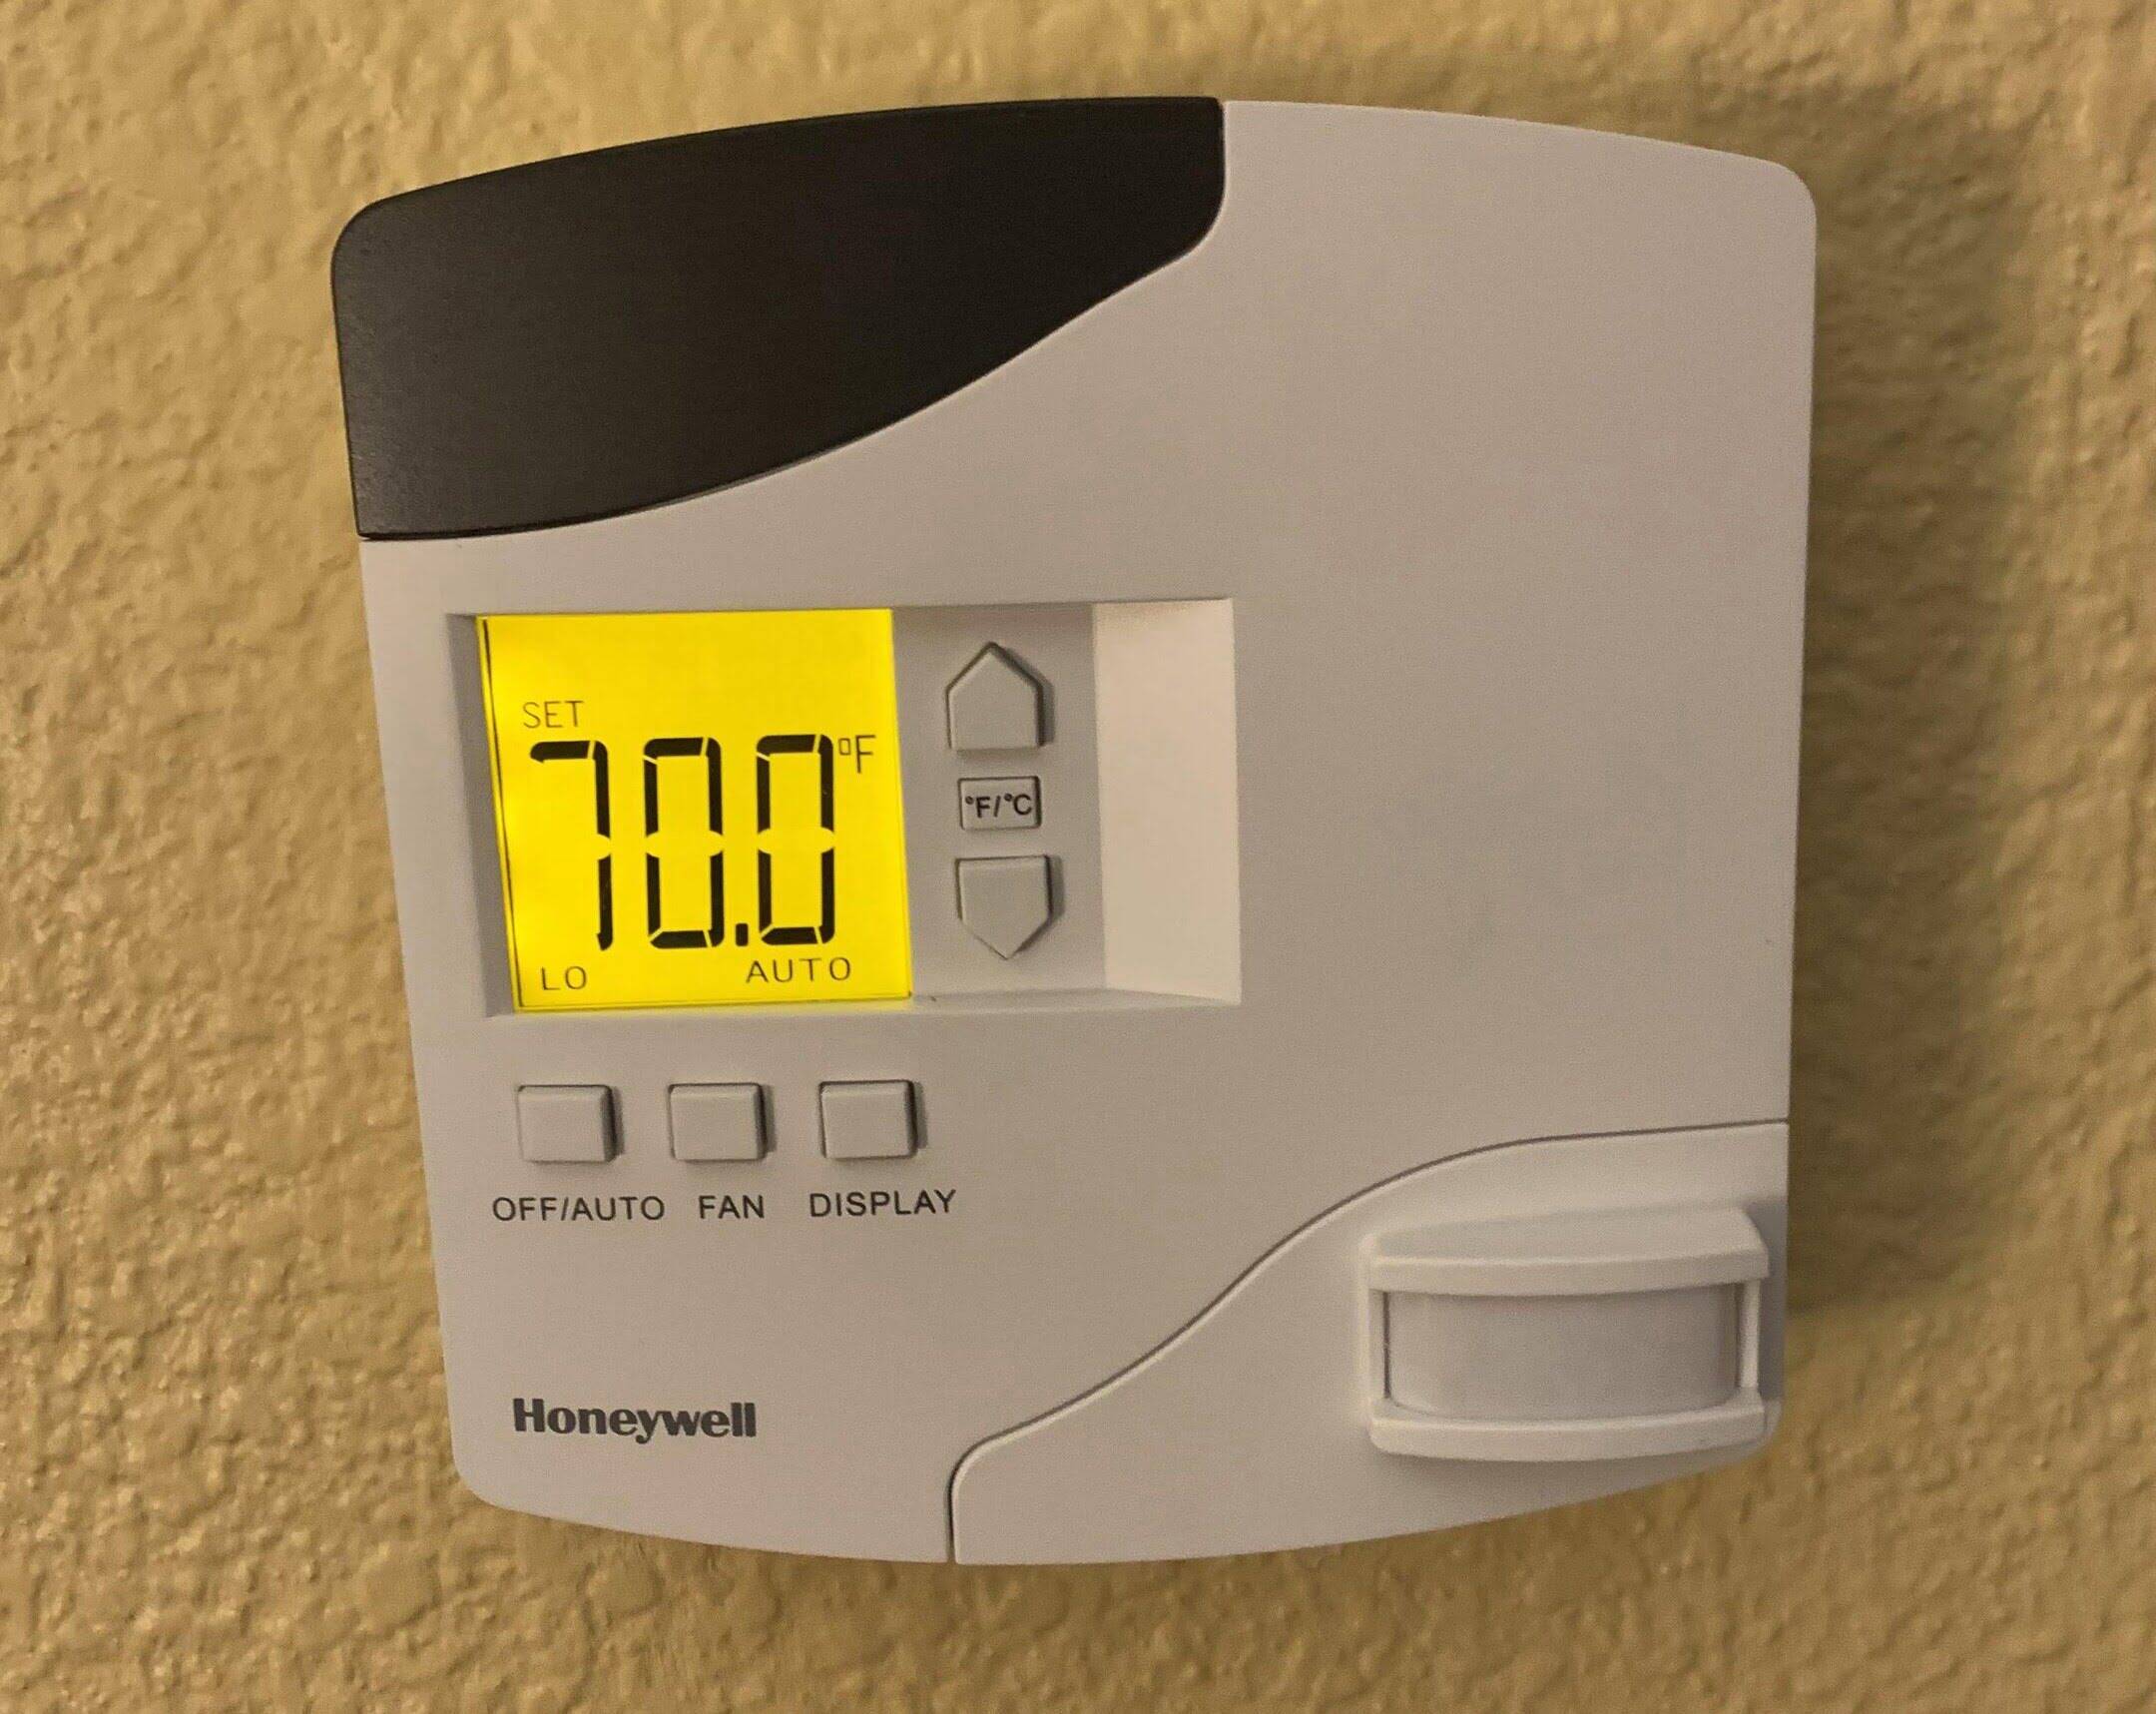 How To Disable Motion Detector On Honeywell Thermostat